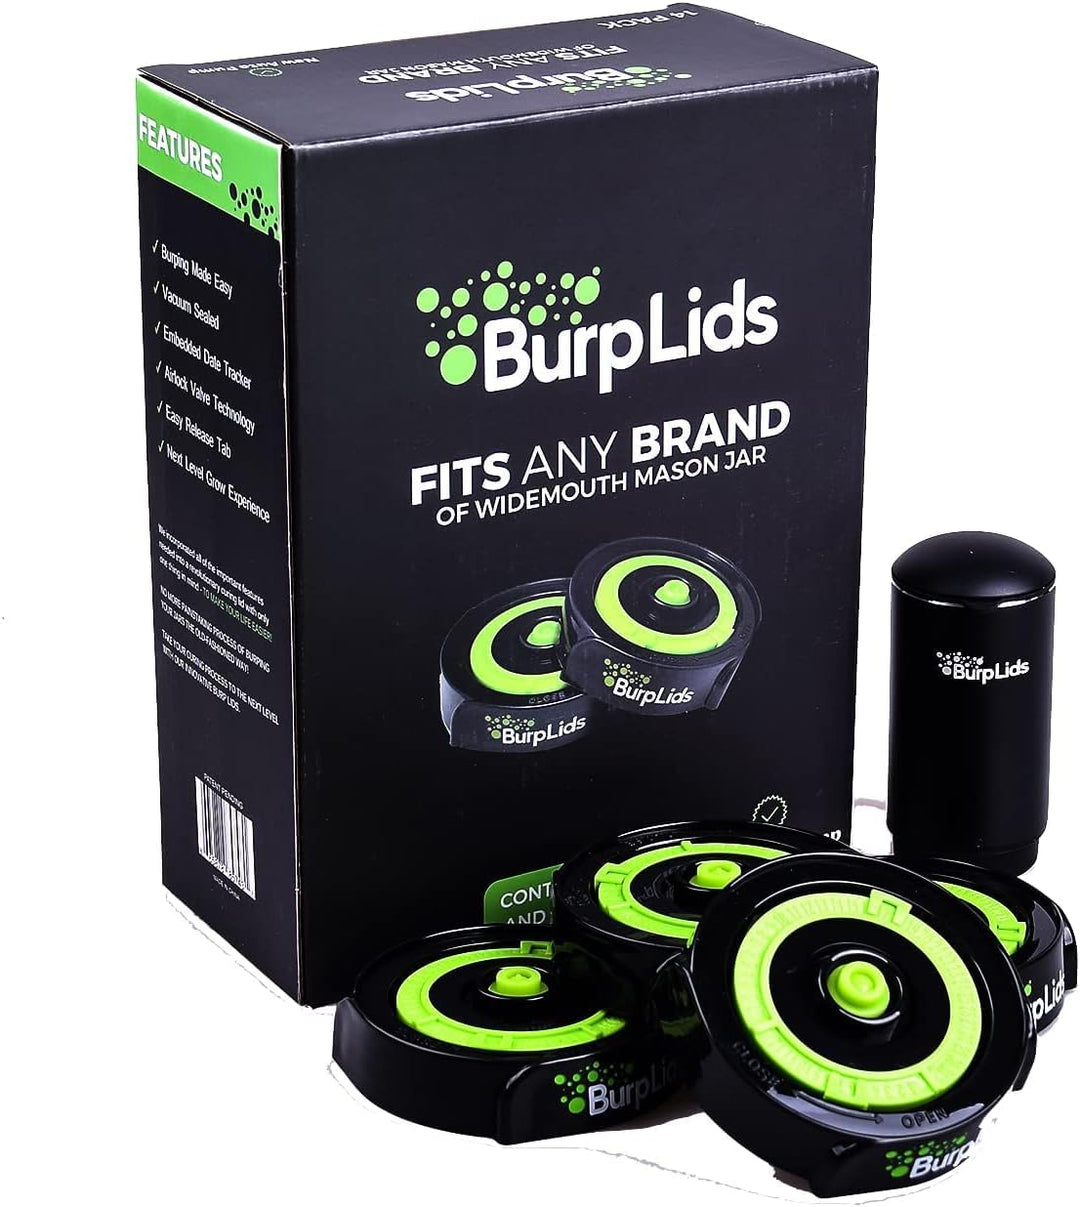 BurpLids® 14 Pack Curing Kit With NEW AUTO PUMP - Fits All Wide Mouth Mason Jar Containers - A Home Harvesting Essential. 14 lids + Electric Auto Pump. Vacuum sealed for successful cure